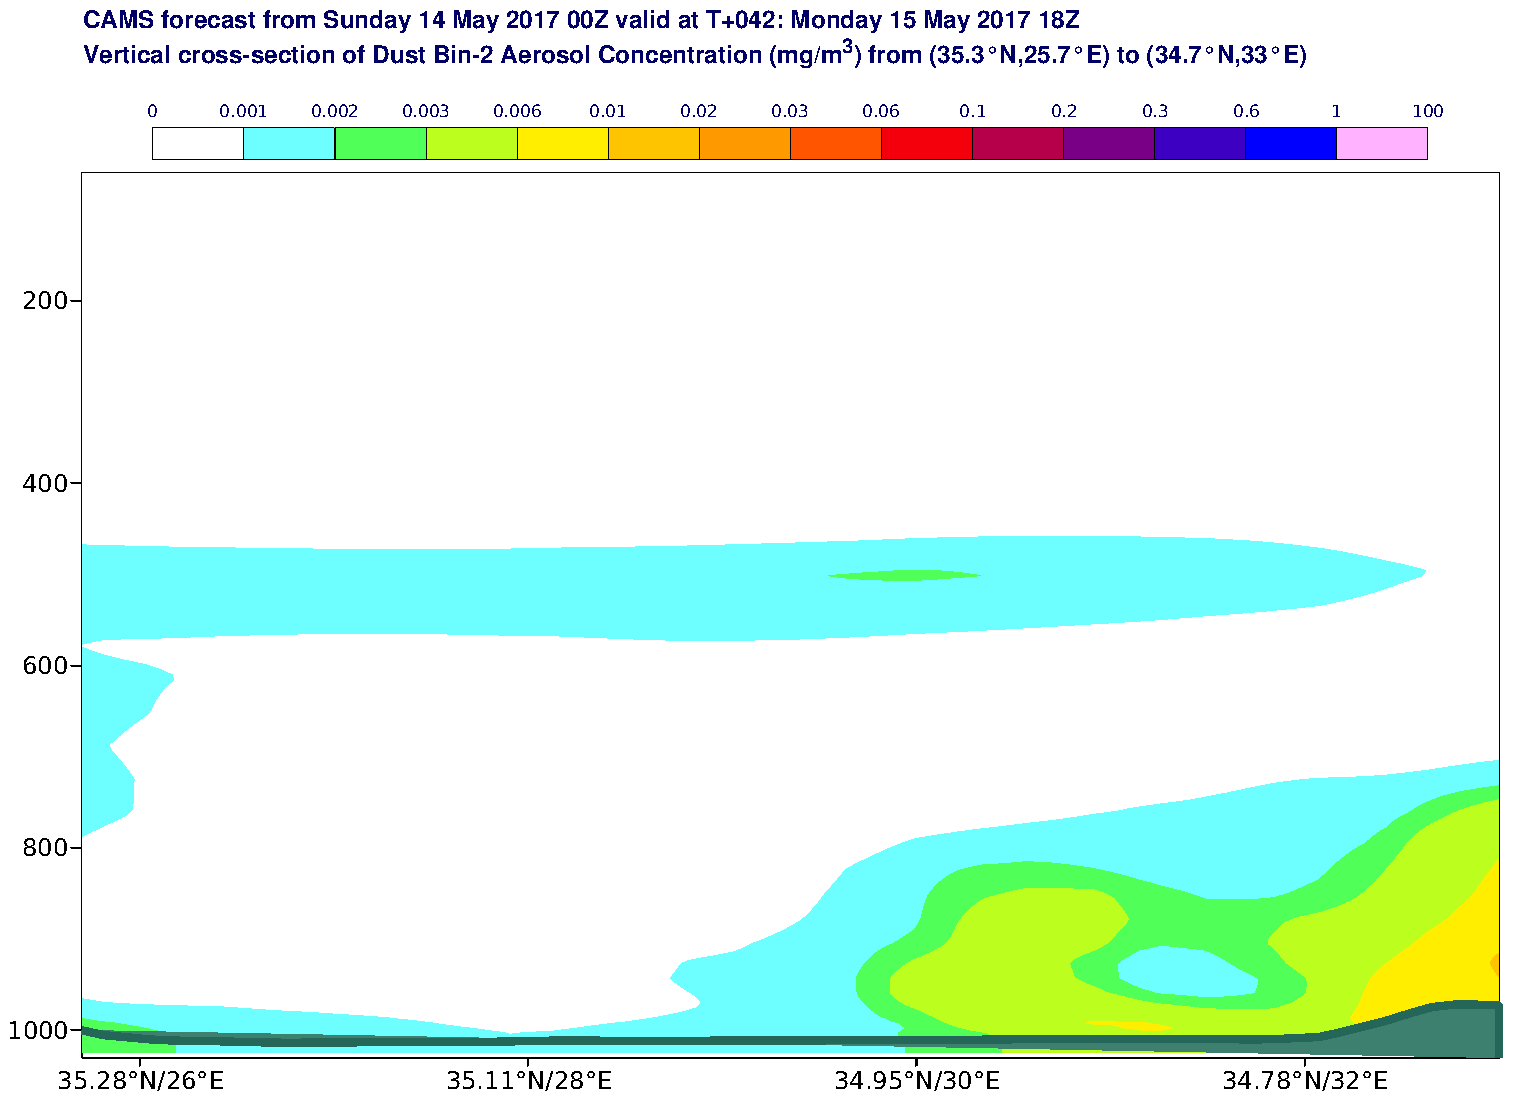 Vertical cross-section of Dust Bin-2 Aerosol Concentration (mg/m3) valid at T42 - 2017-05-15 18:00